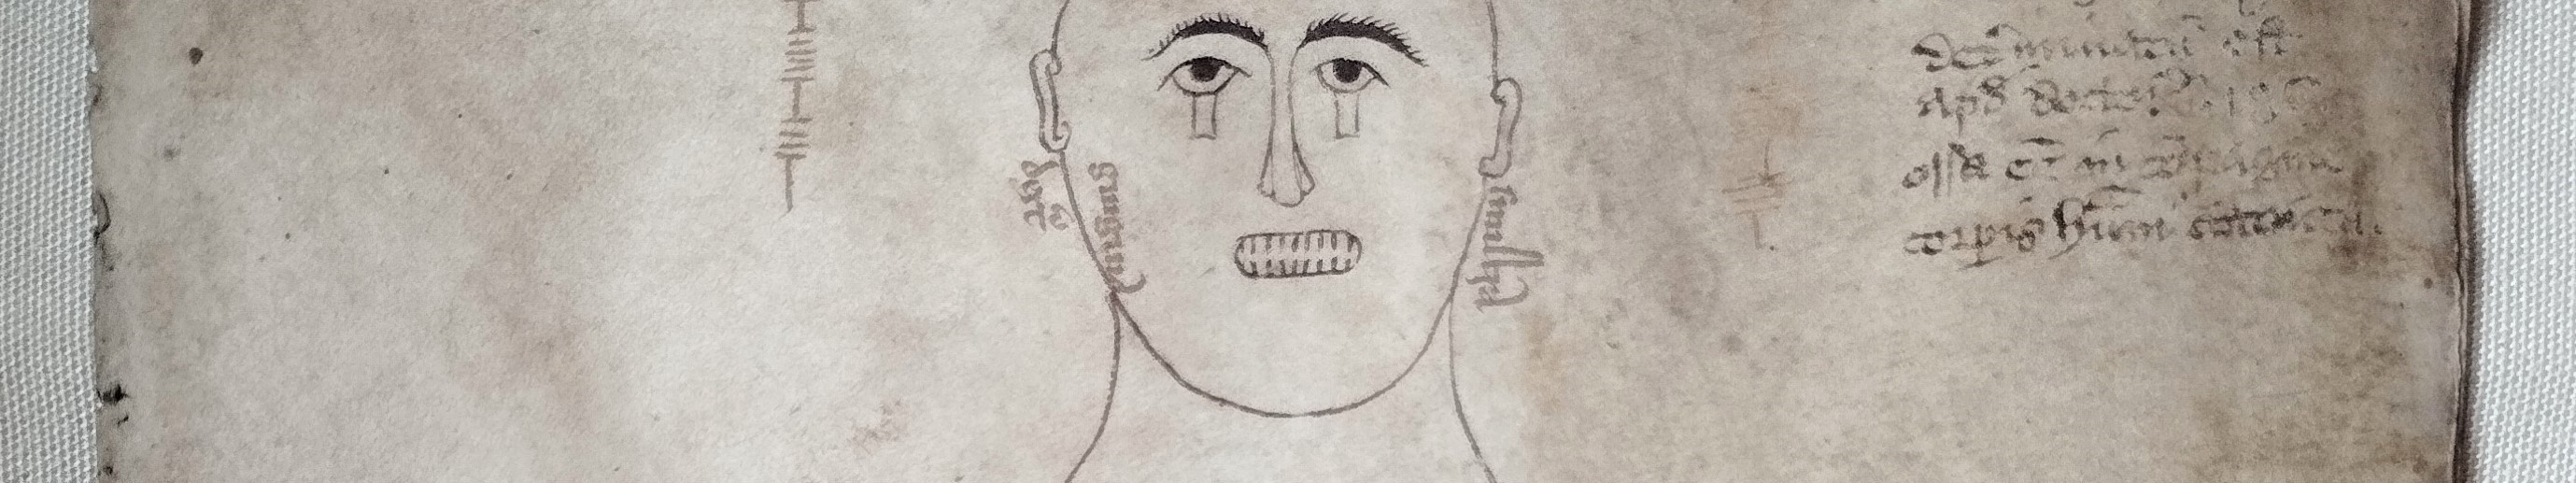 detail of drawing of a human figure